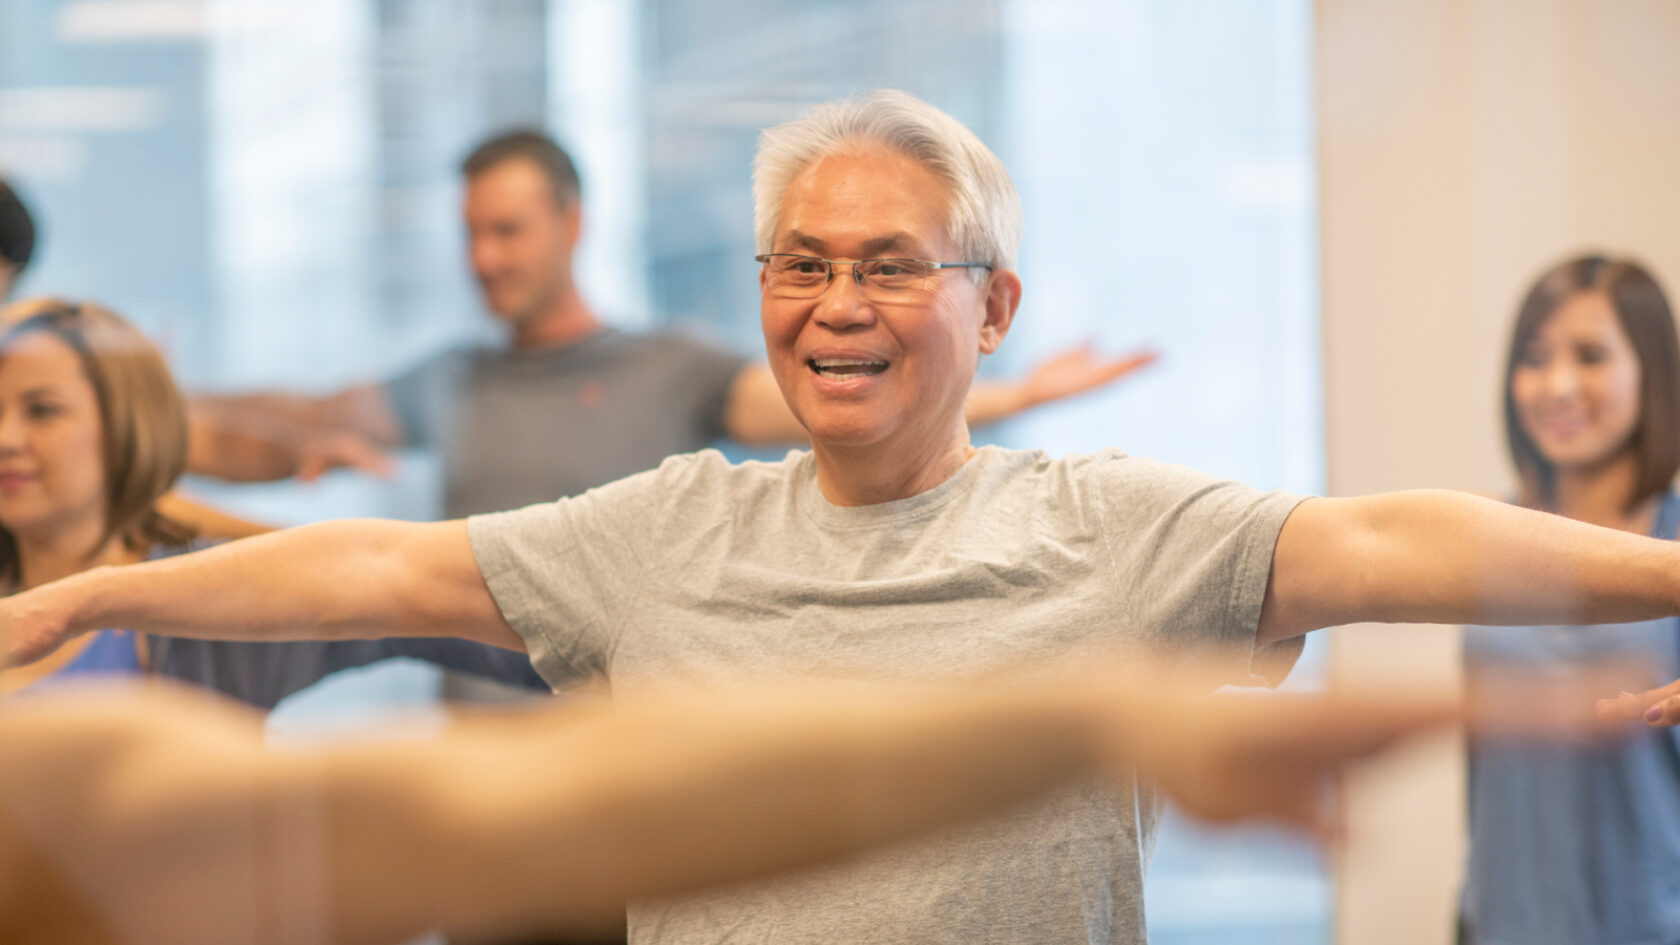 A man participates in an exercise class.